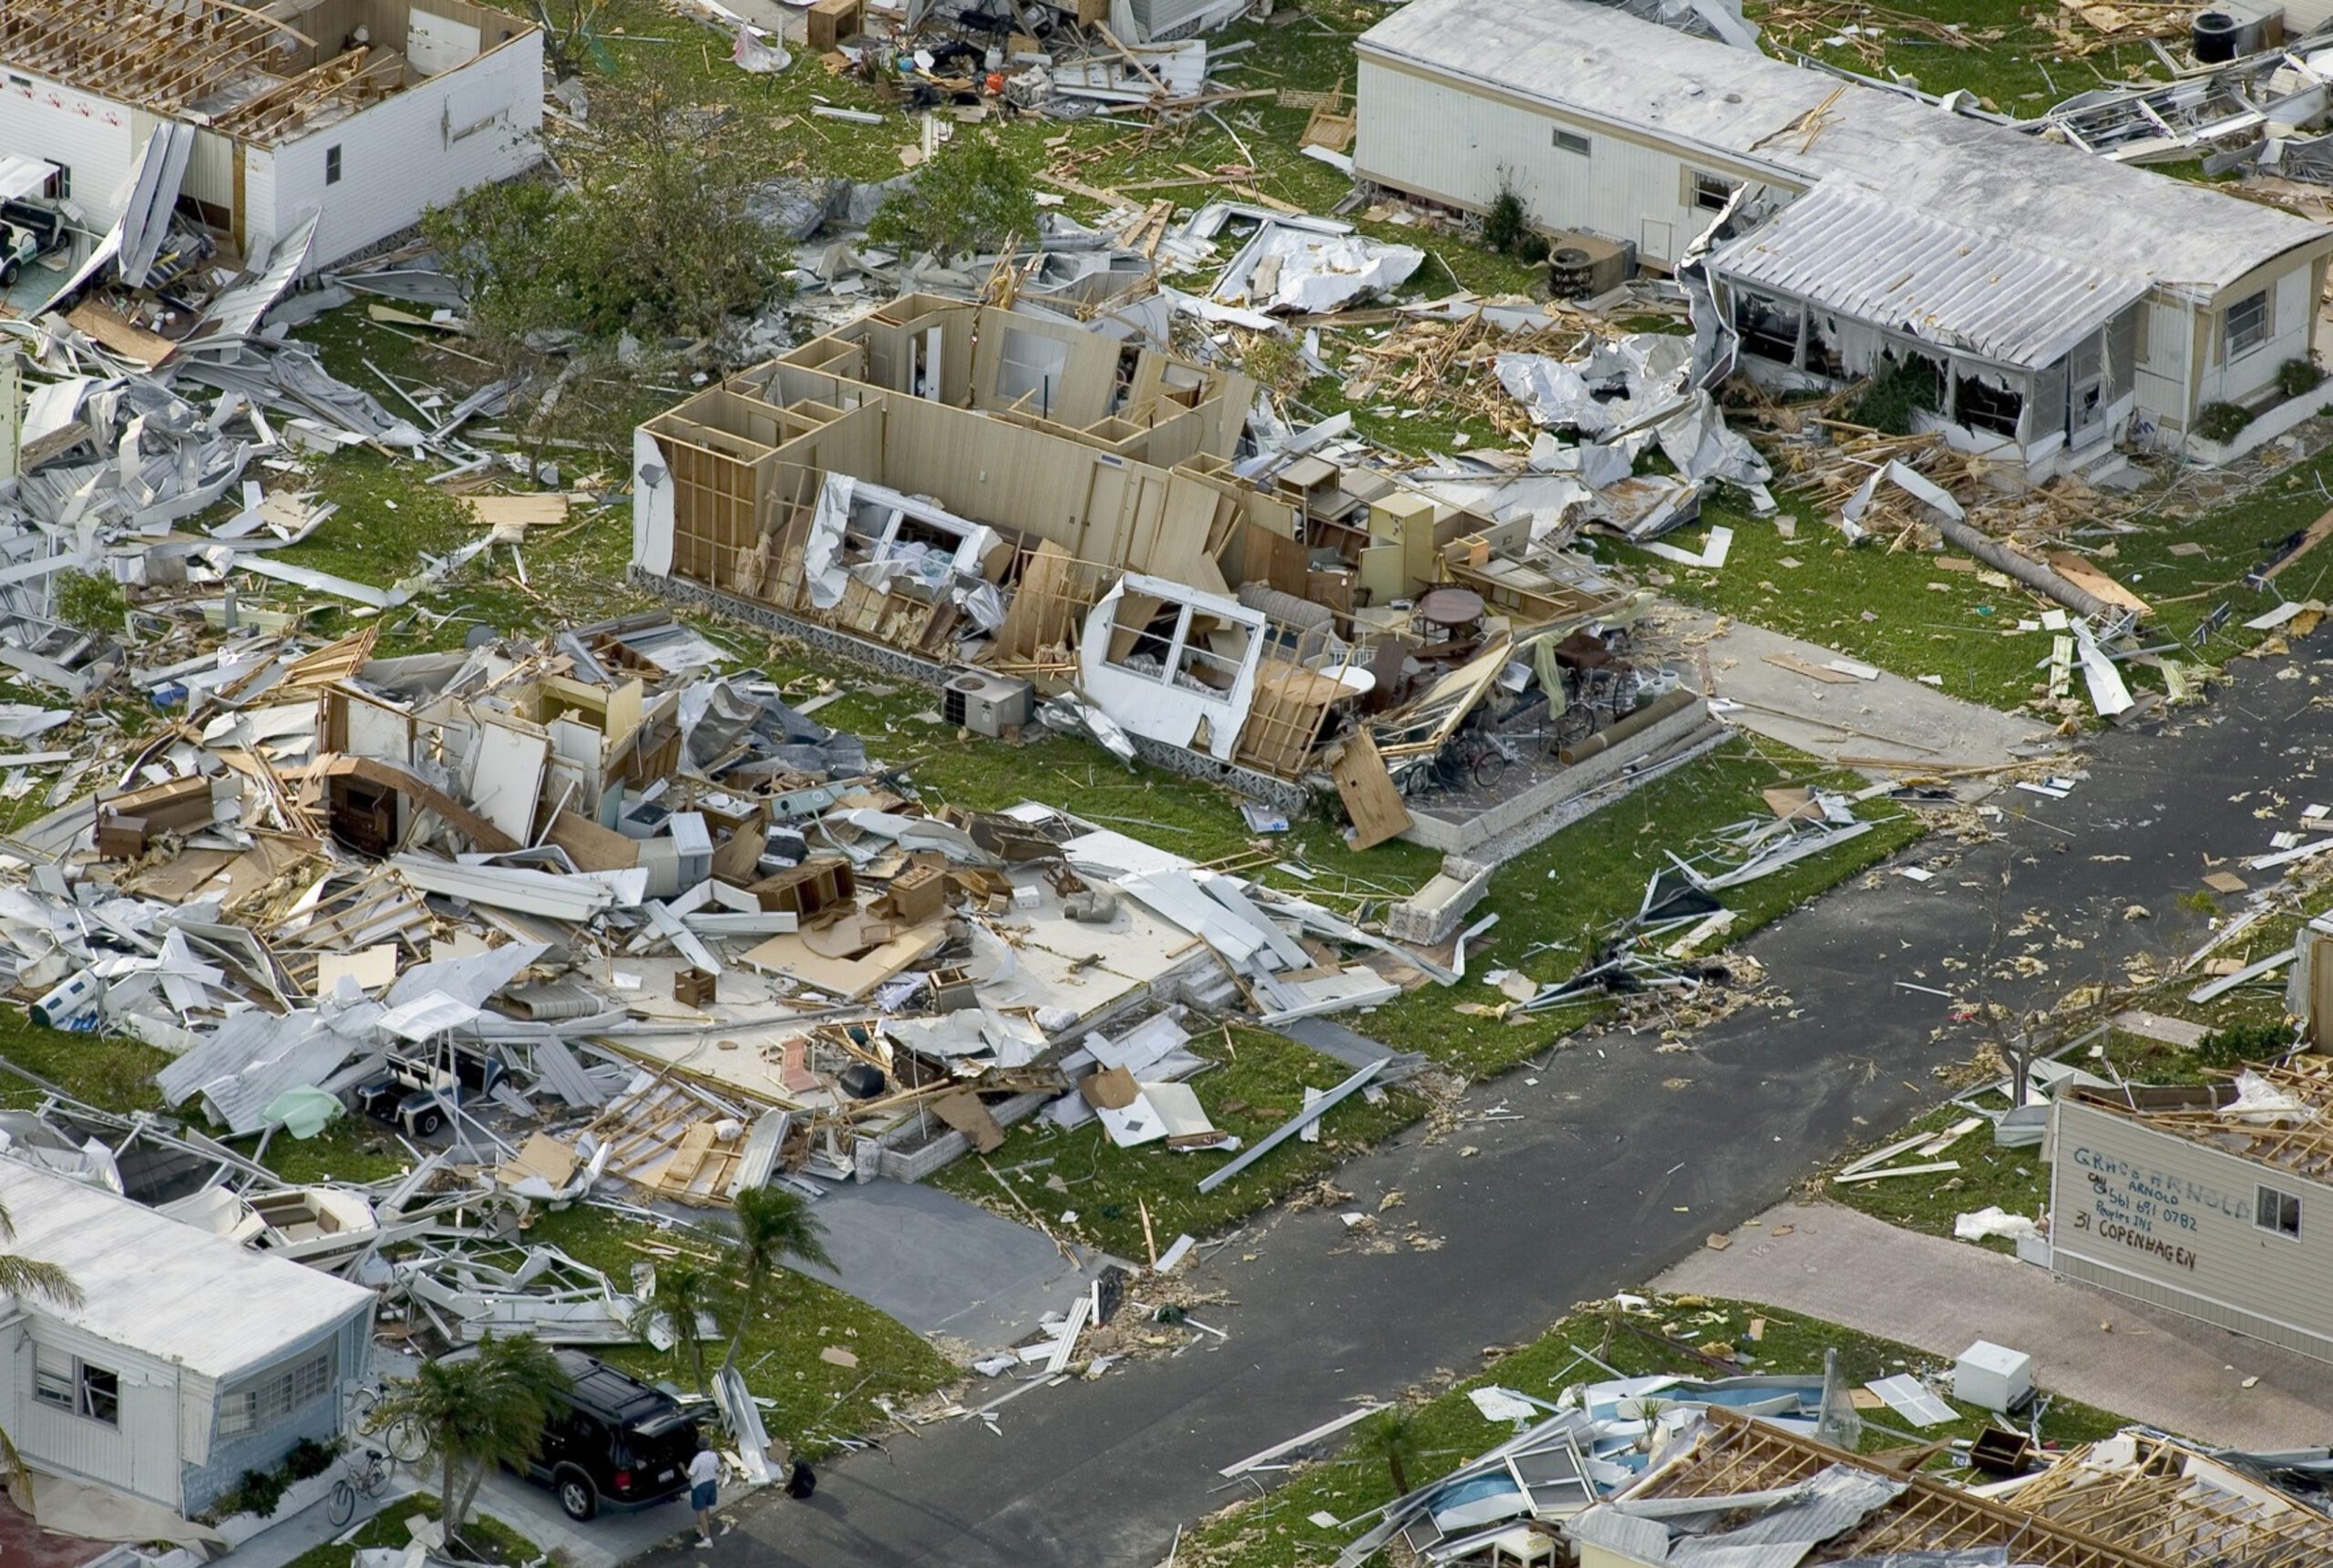 Florida homes strewn with debris, including fallen branches, broken furniture, and scattered belongings post hurricane.